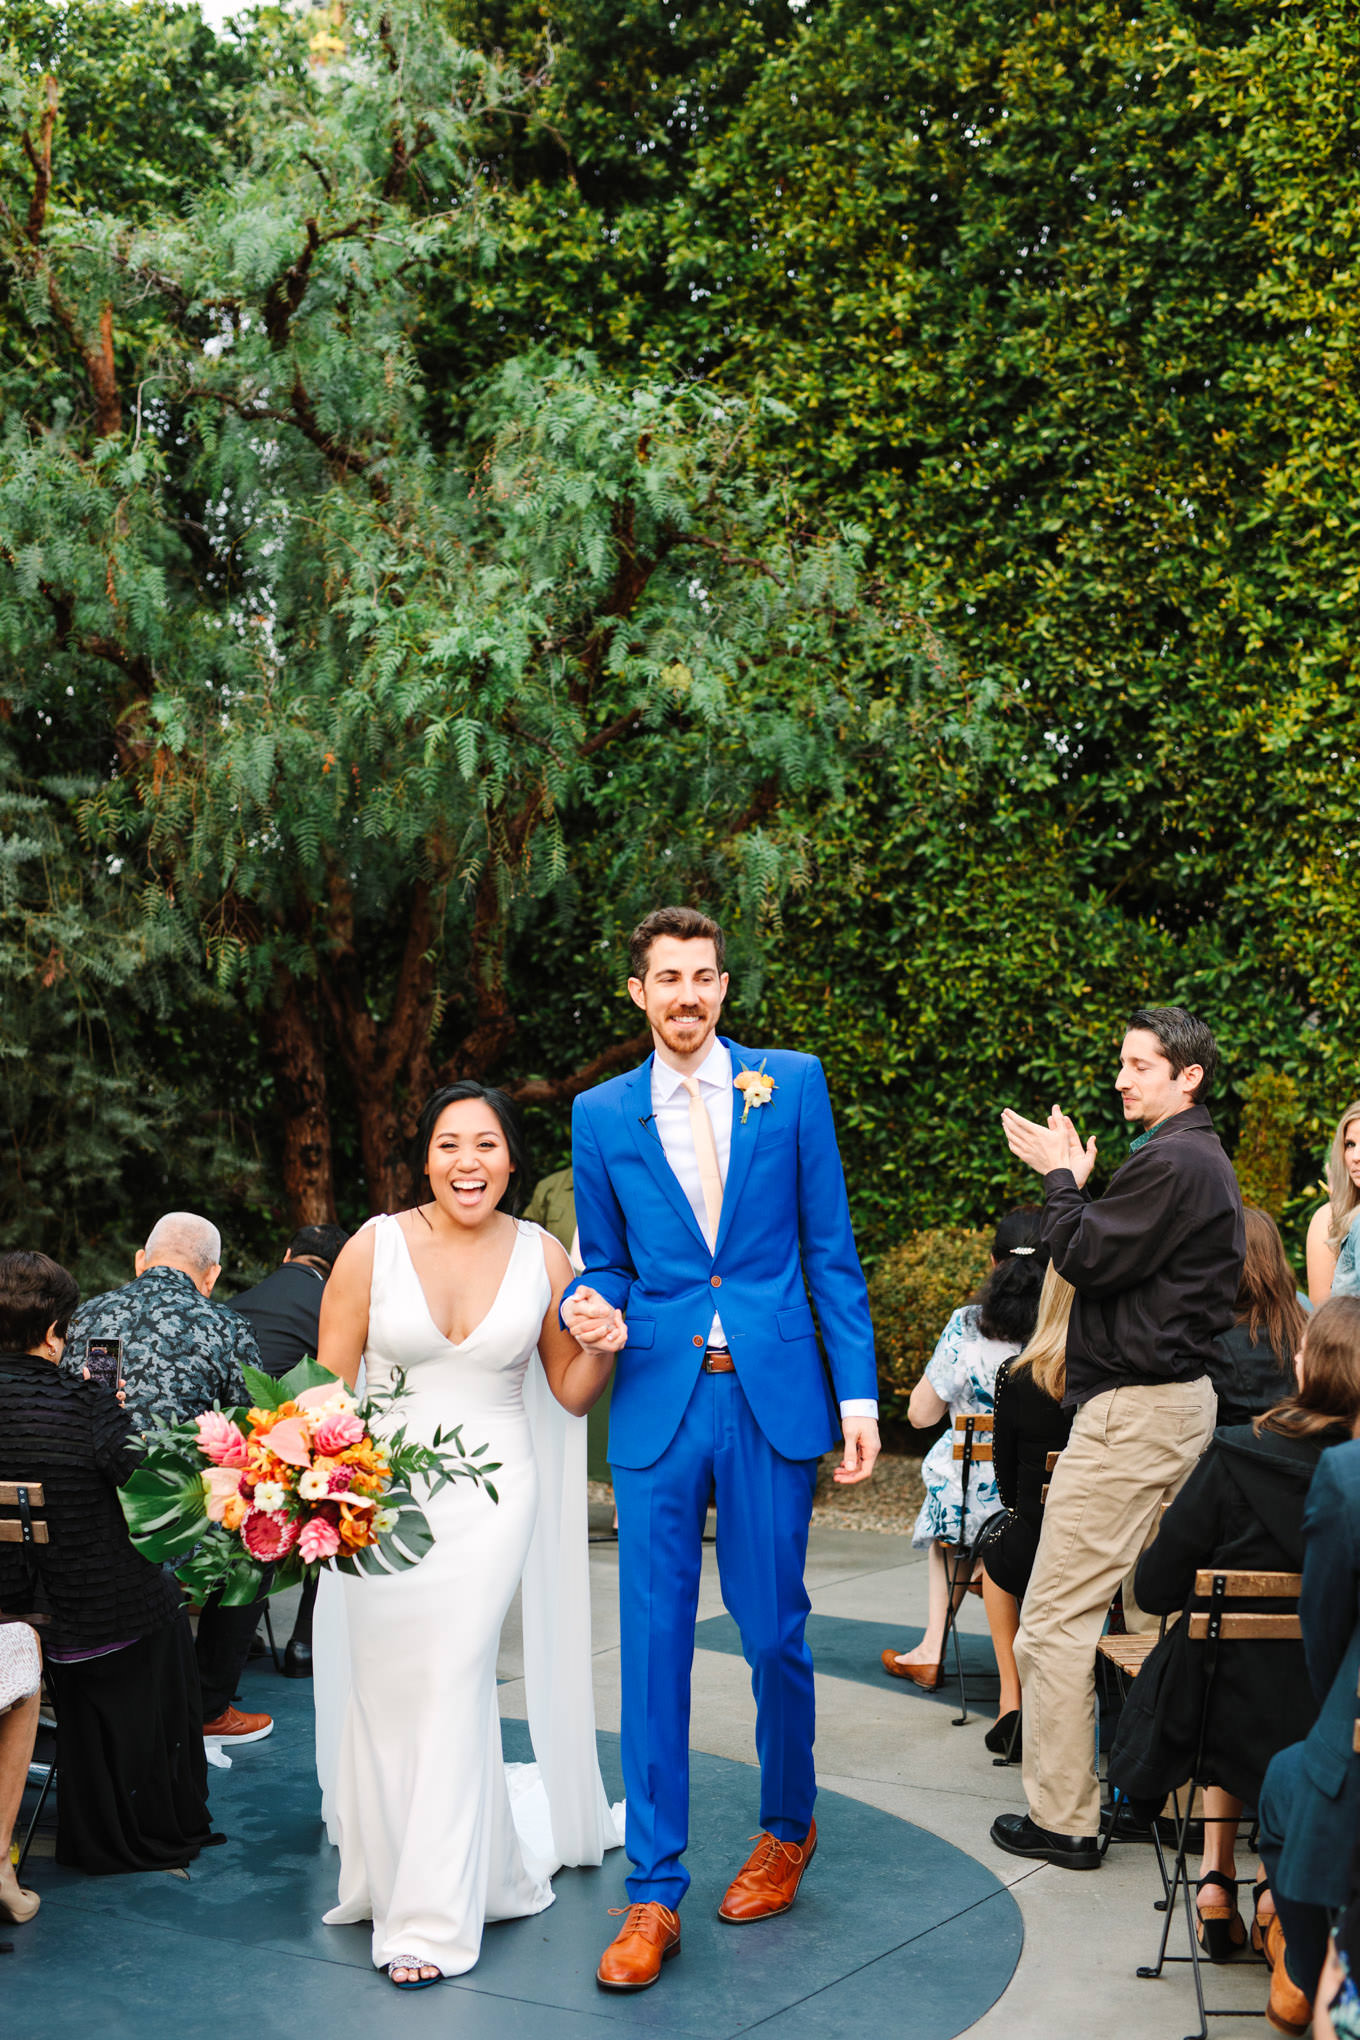 Bride and groom exiting wedding ceremony | TV inspired wedding at The Fig House Los Angeles | Published on The Knot | Fresh and colorful photography for fun-loving couples in Southern California | #losangeleswedding #TVwedding #colorfulwedding #theknot   Source: Mary Costa Photography | Los Angeles wedding photographer